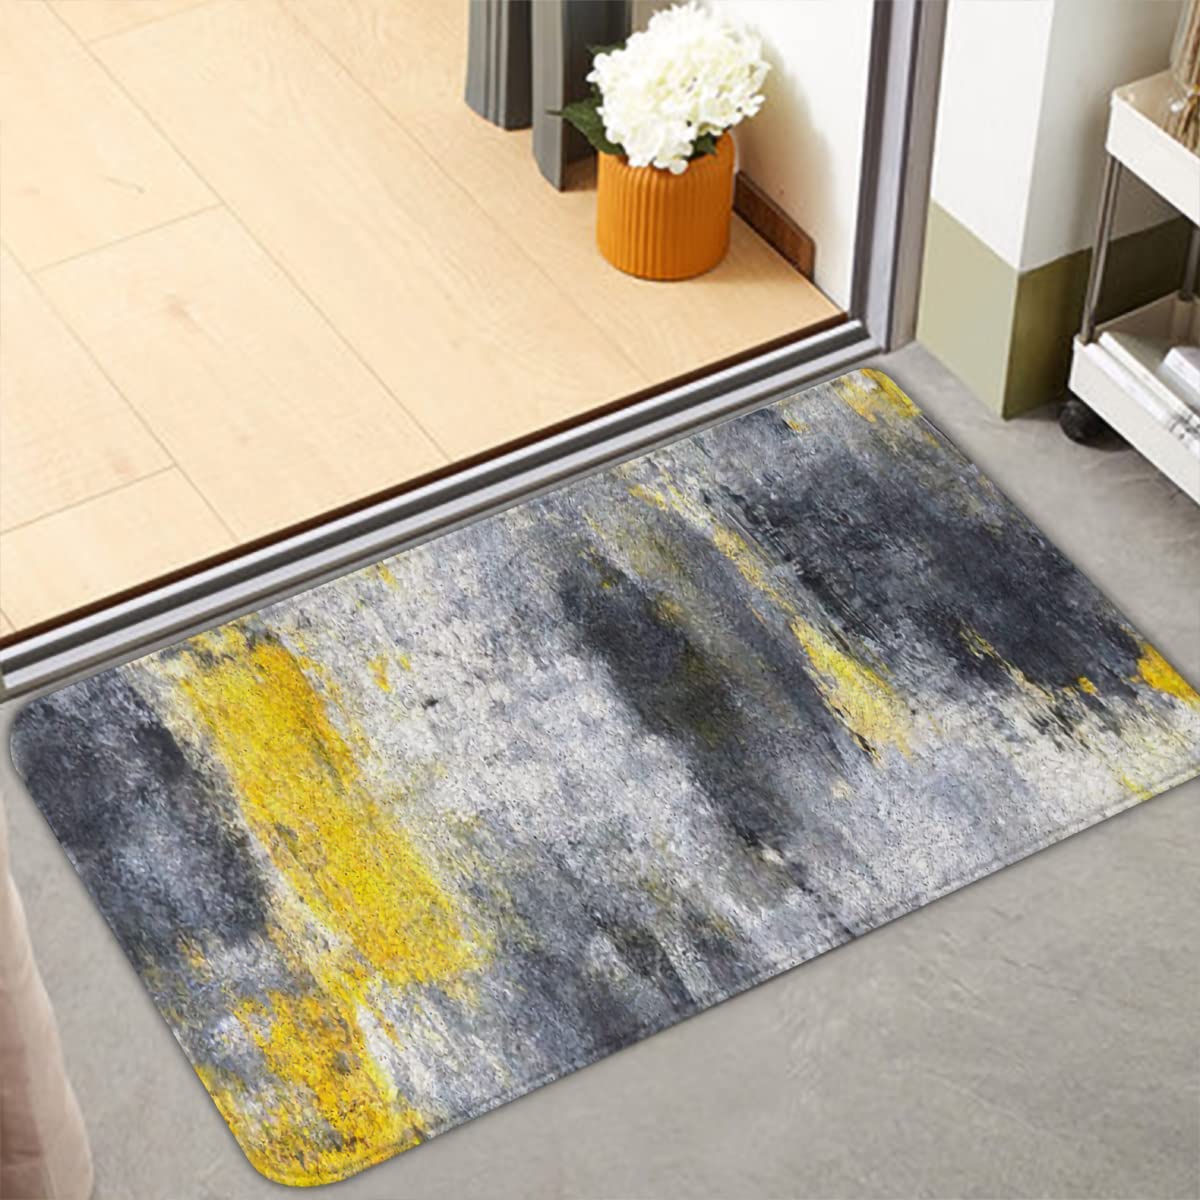 Subently 2PCS Yellow Ombre Kitchen Rugs Abstract Floor Runner Yellow and Gray Non-Slip Area Carpets Mustard Grunge Kitchen Mat Set for Farmhouse Bathroom Laundry 16" x 47"